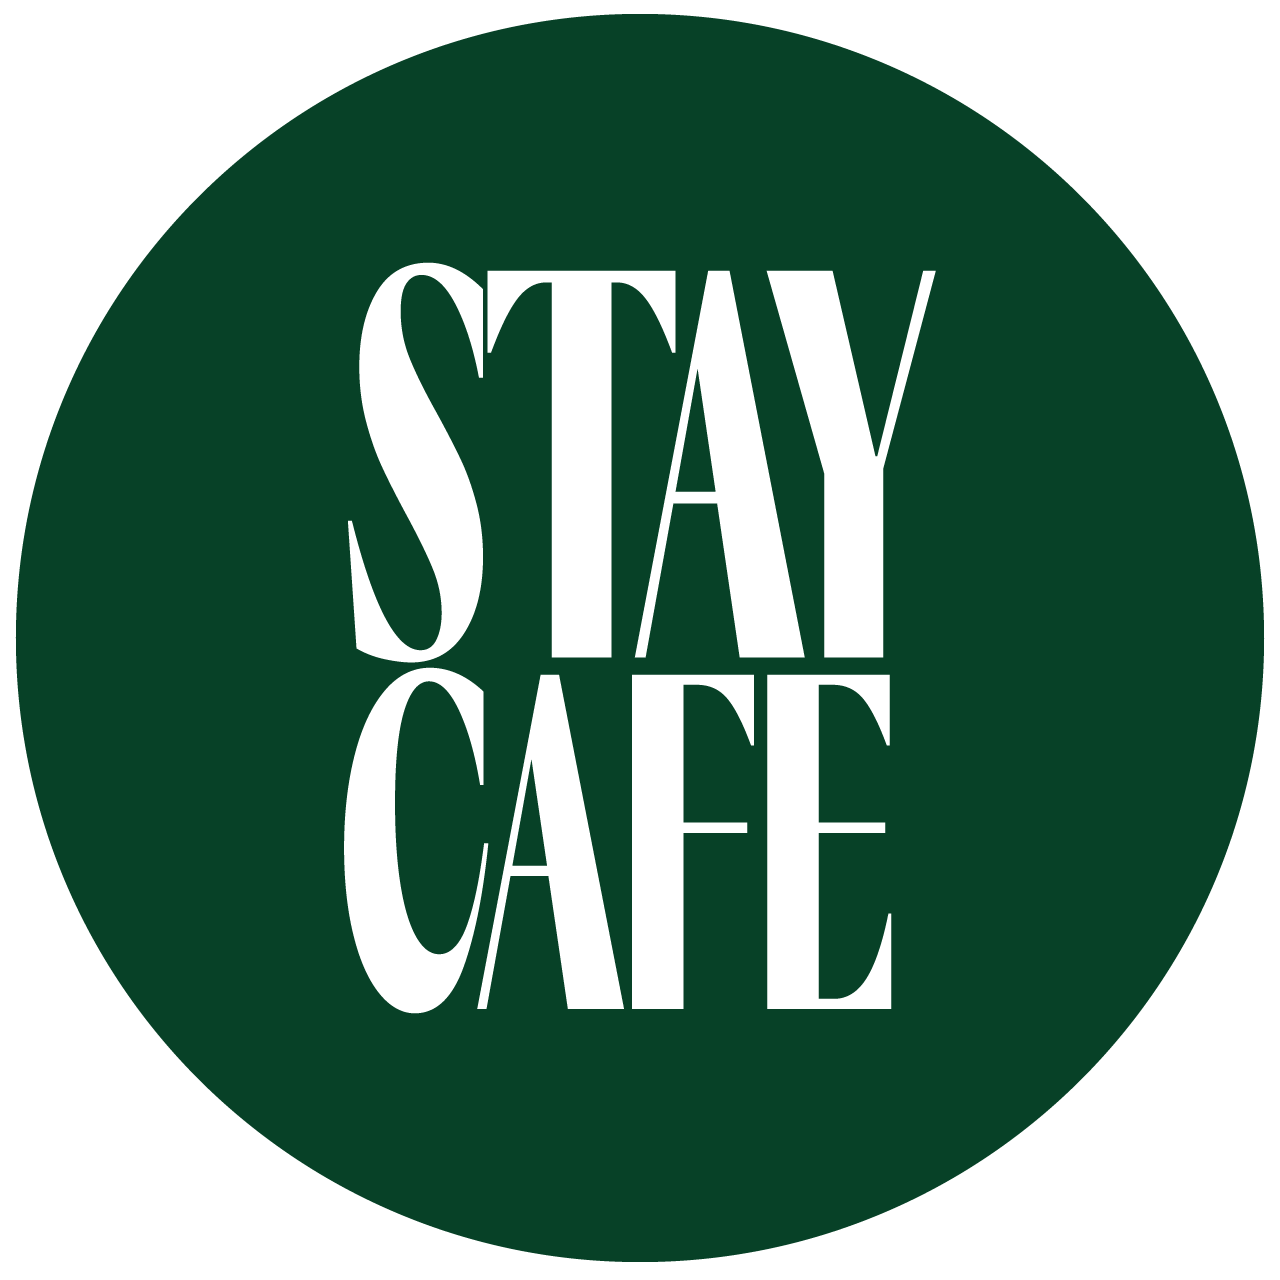 Stay Cafe Home